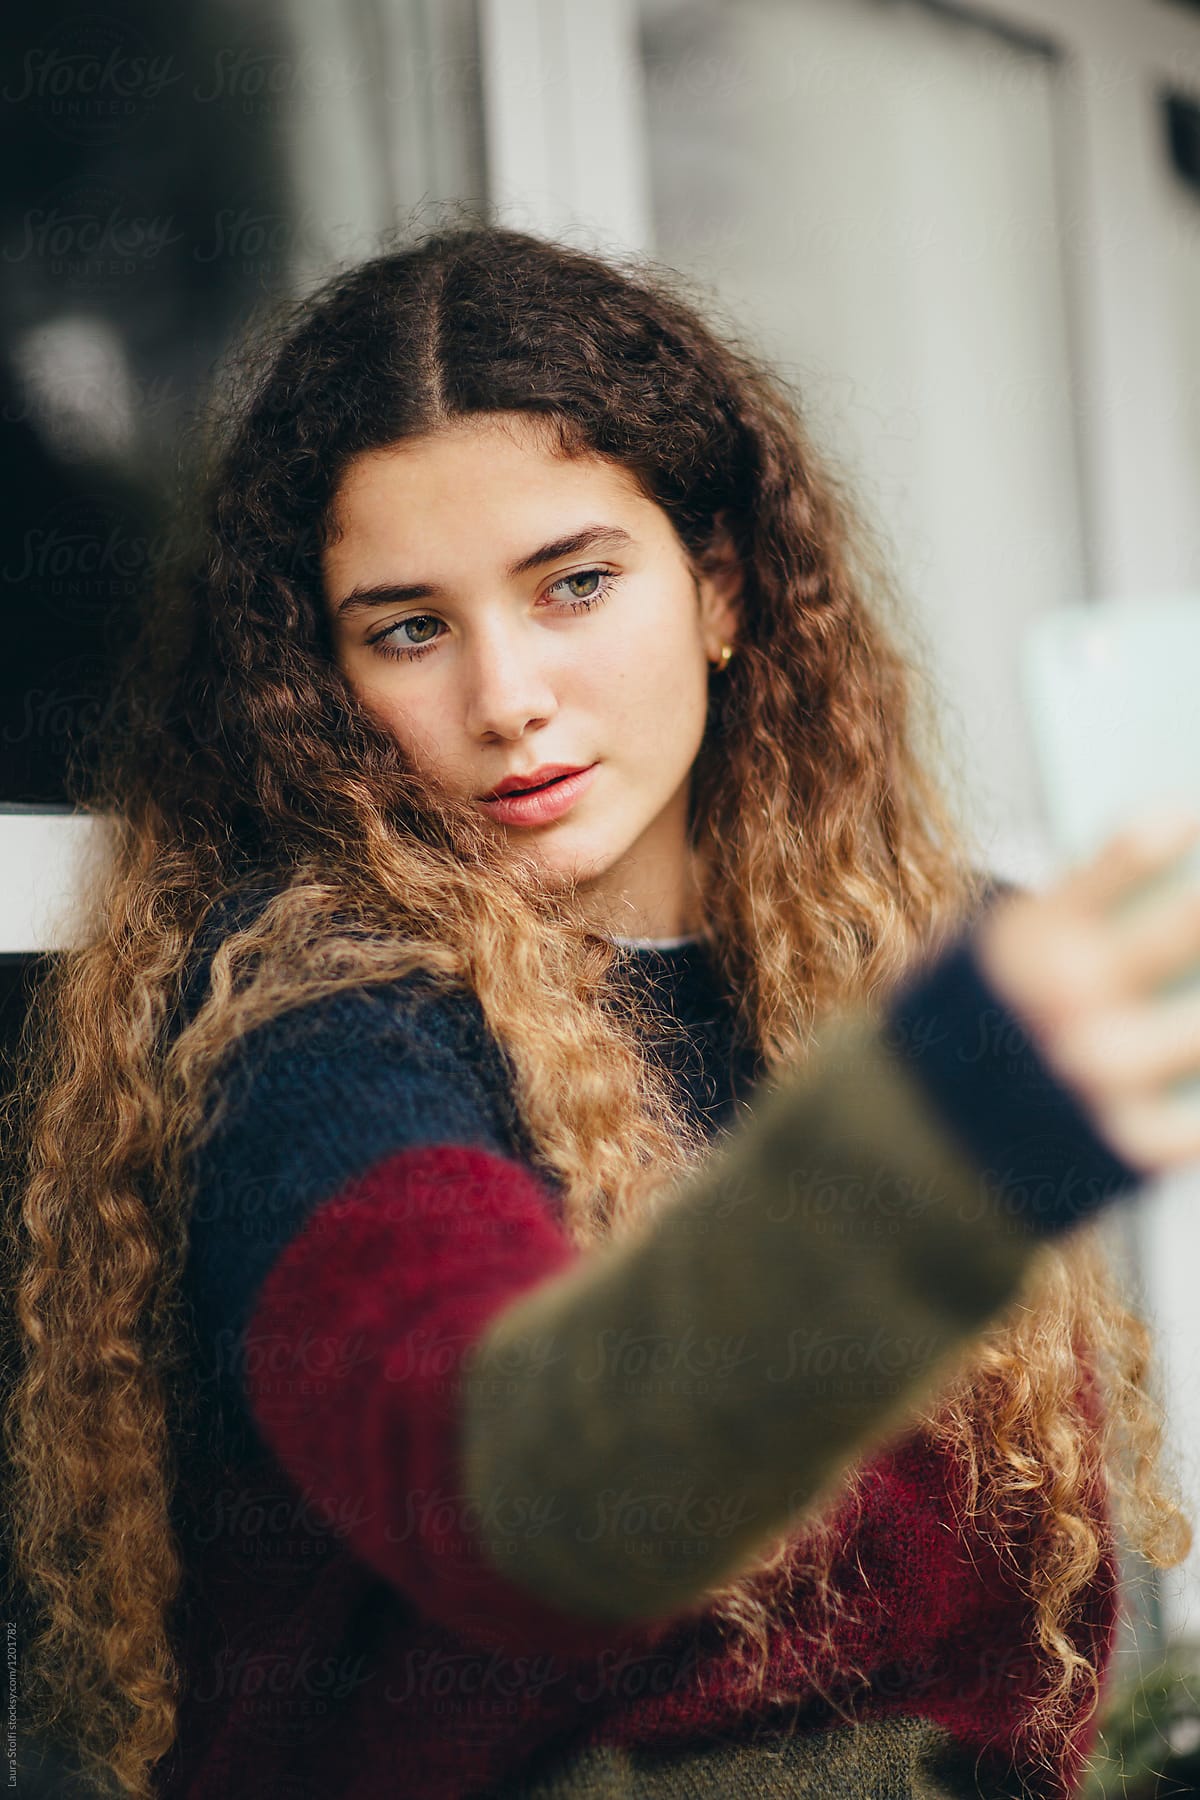 Beautiful young woman acts seductively while holding her phone in front of her for a selfie